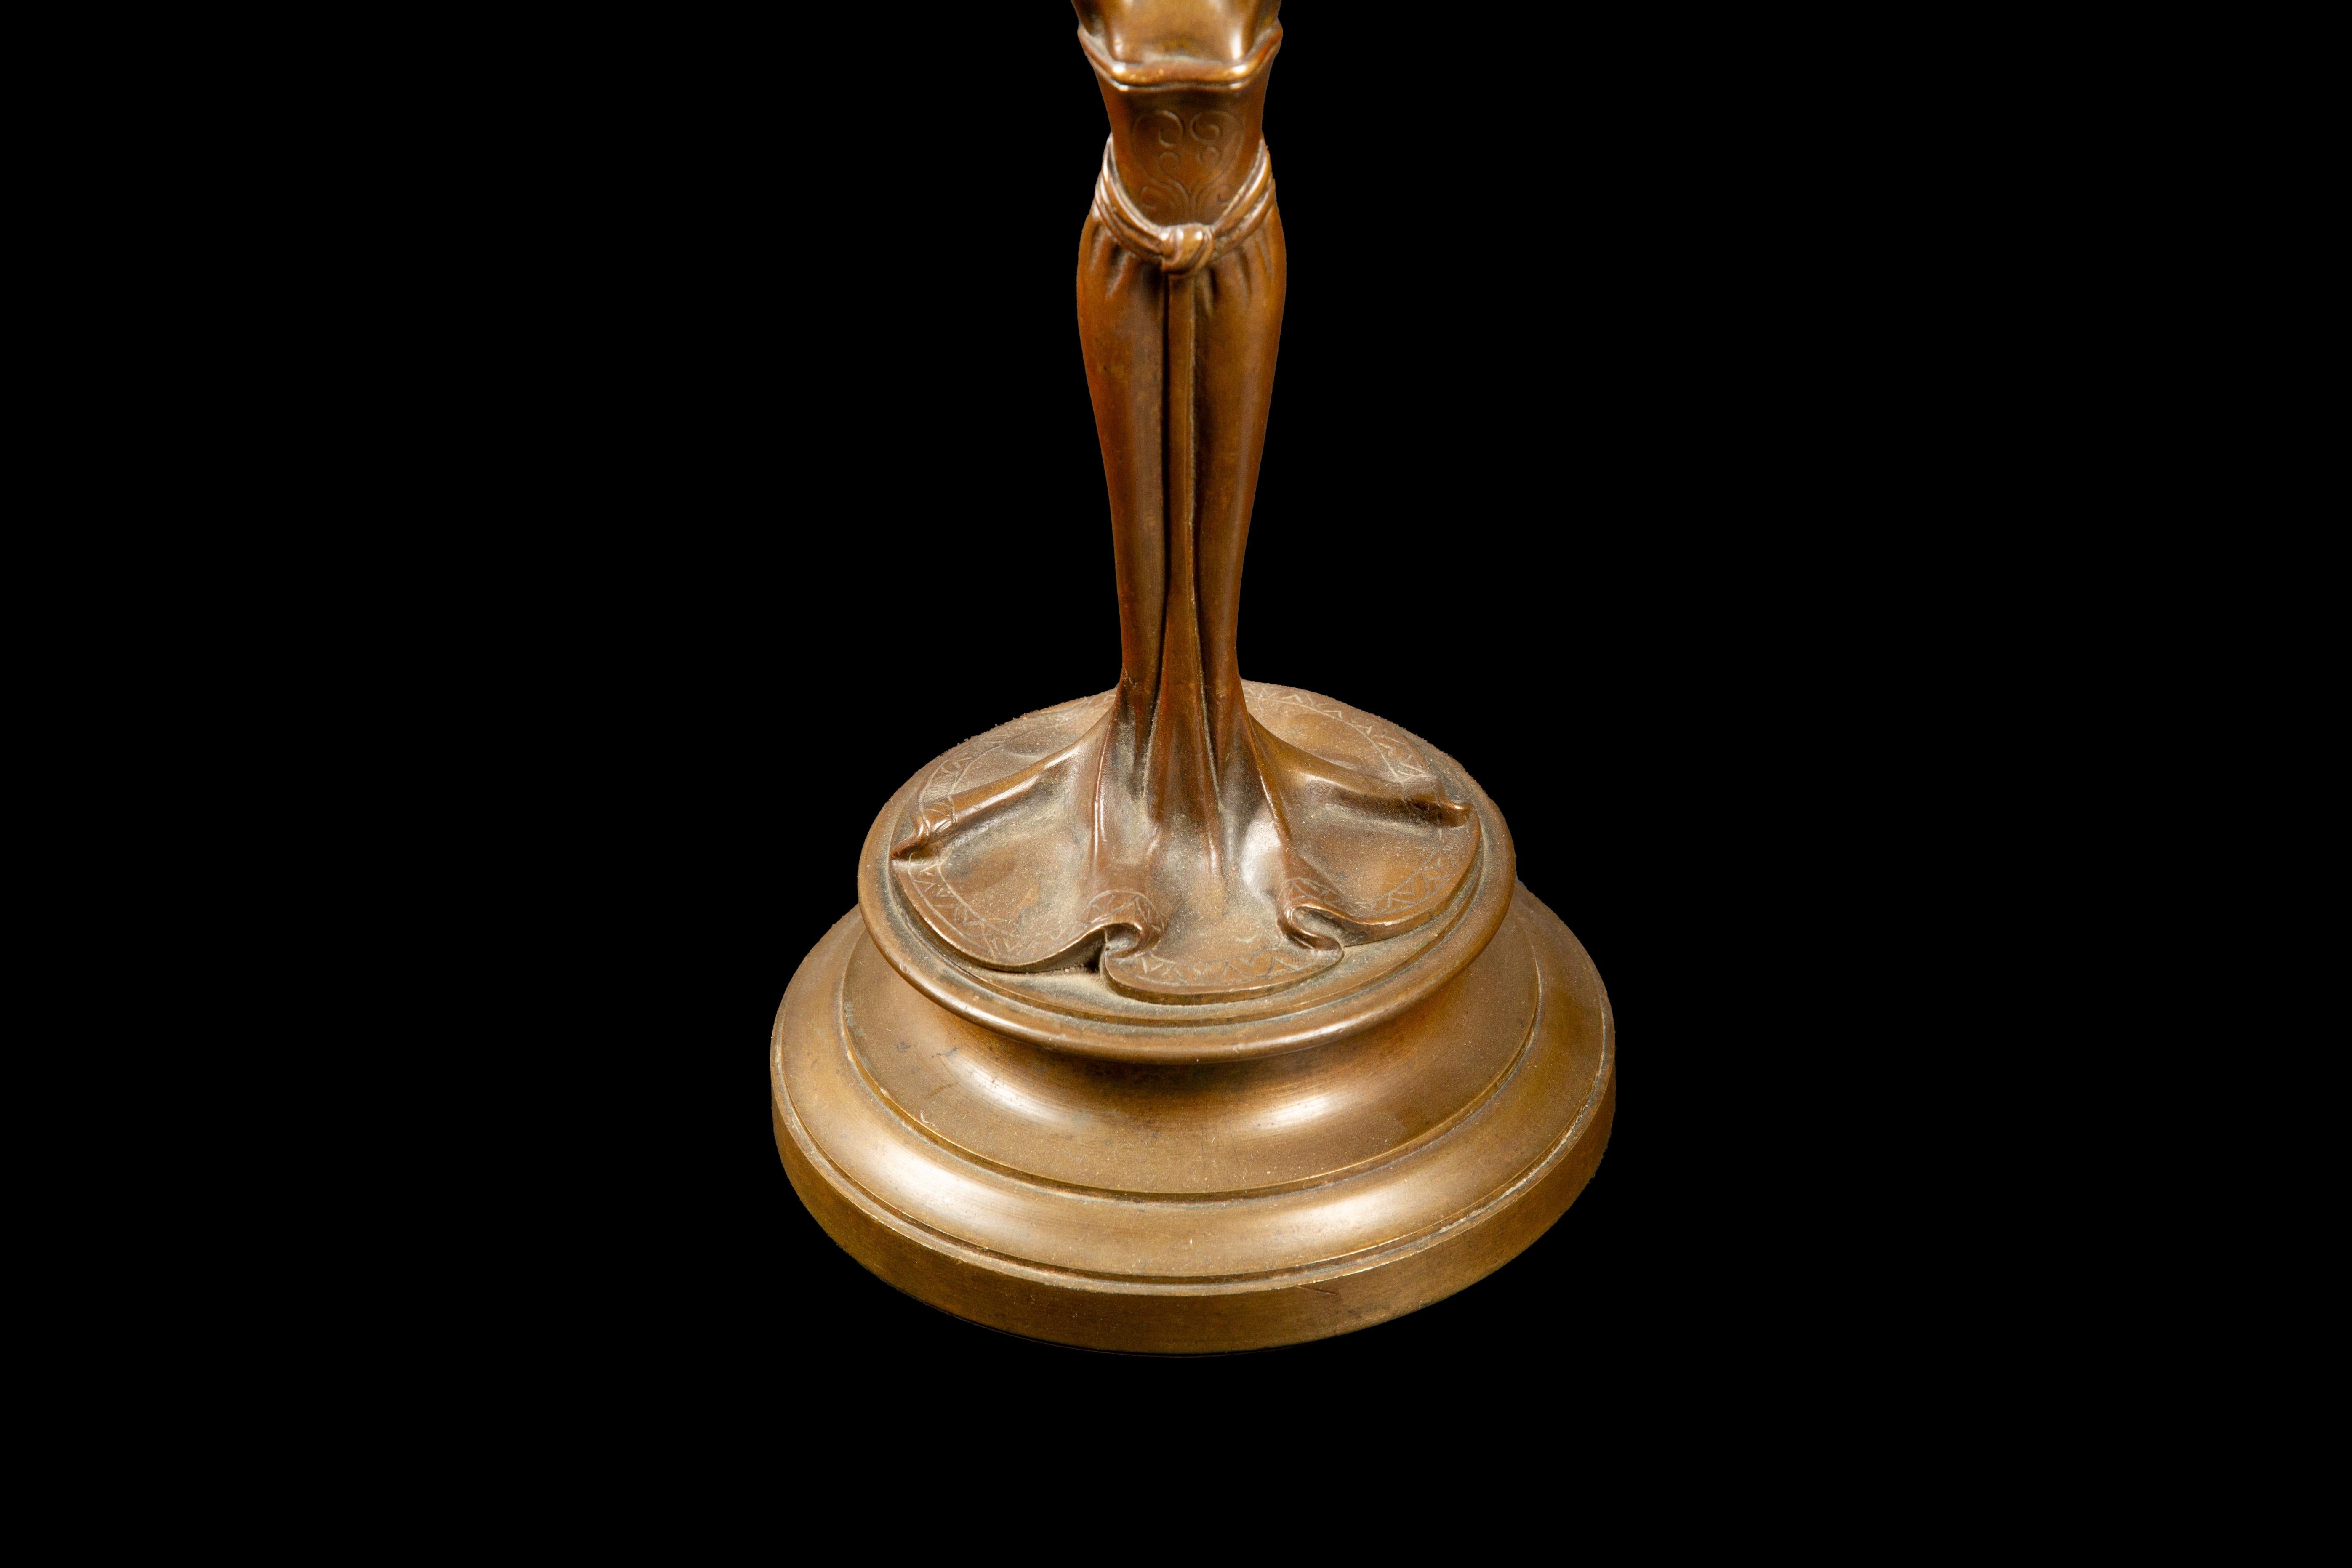 20th Century Art Nouveau Style Bronze of a Woman Holding an Urn 10.5